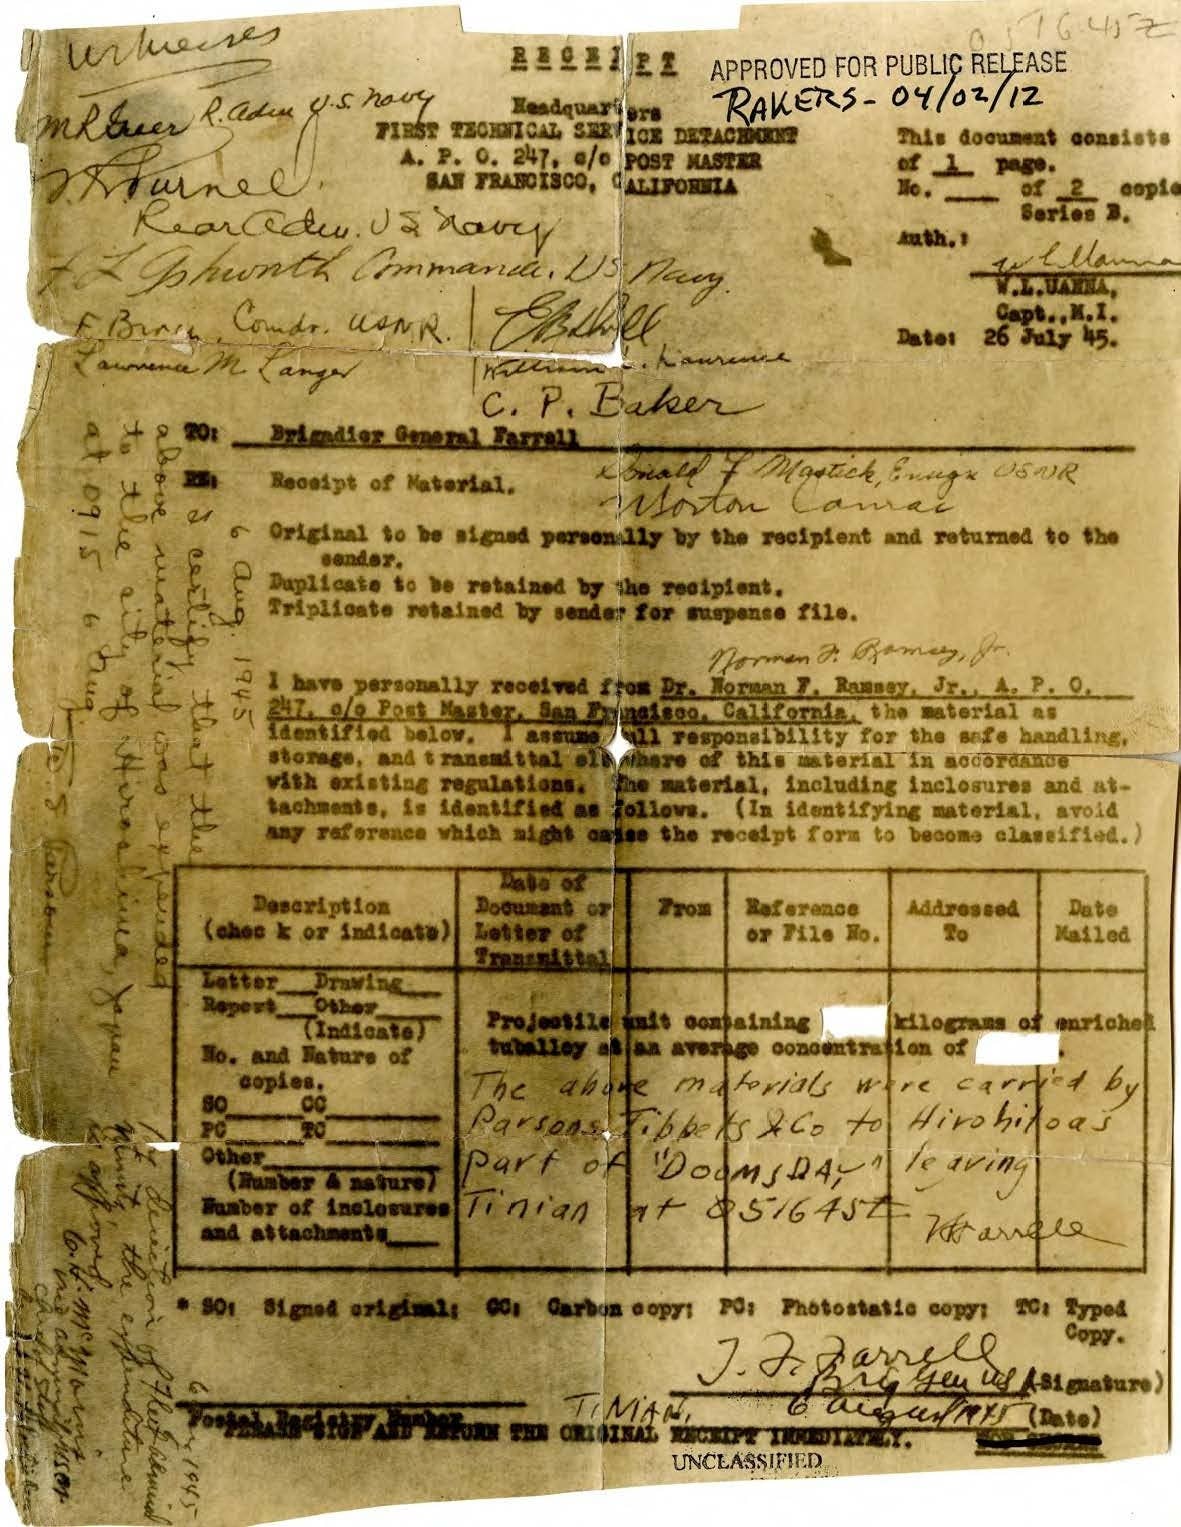 An Army form shows the transfer of materials for components of the Little Boy bomb that was dropped on Hiroshima, Japan.<br>(U.S. Army Heritage Education Center)